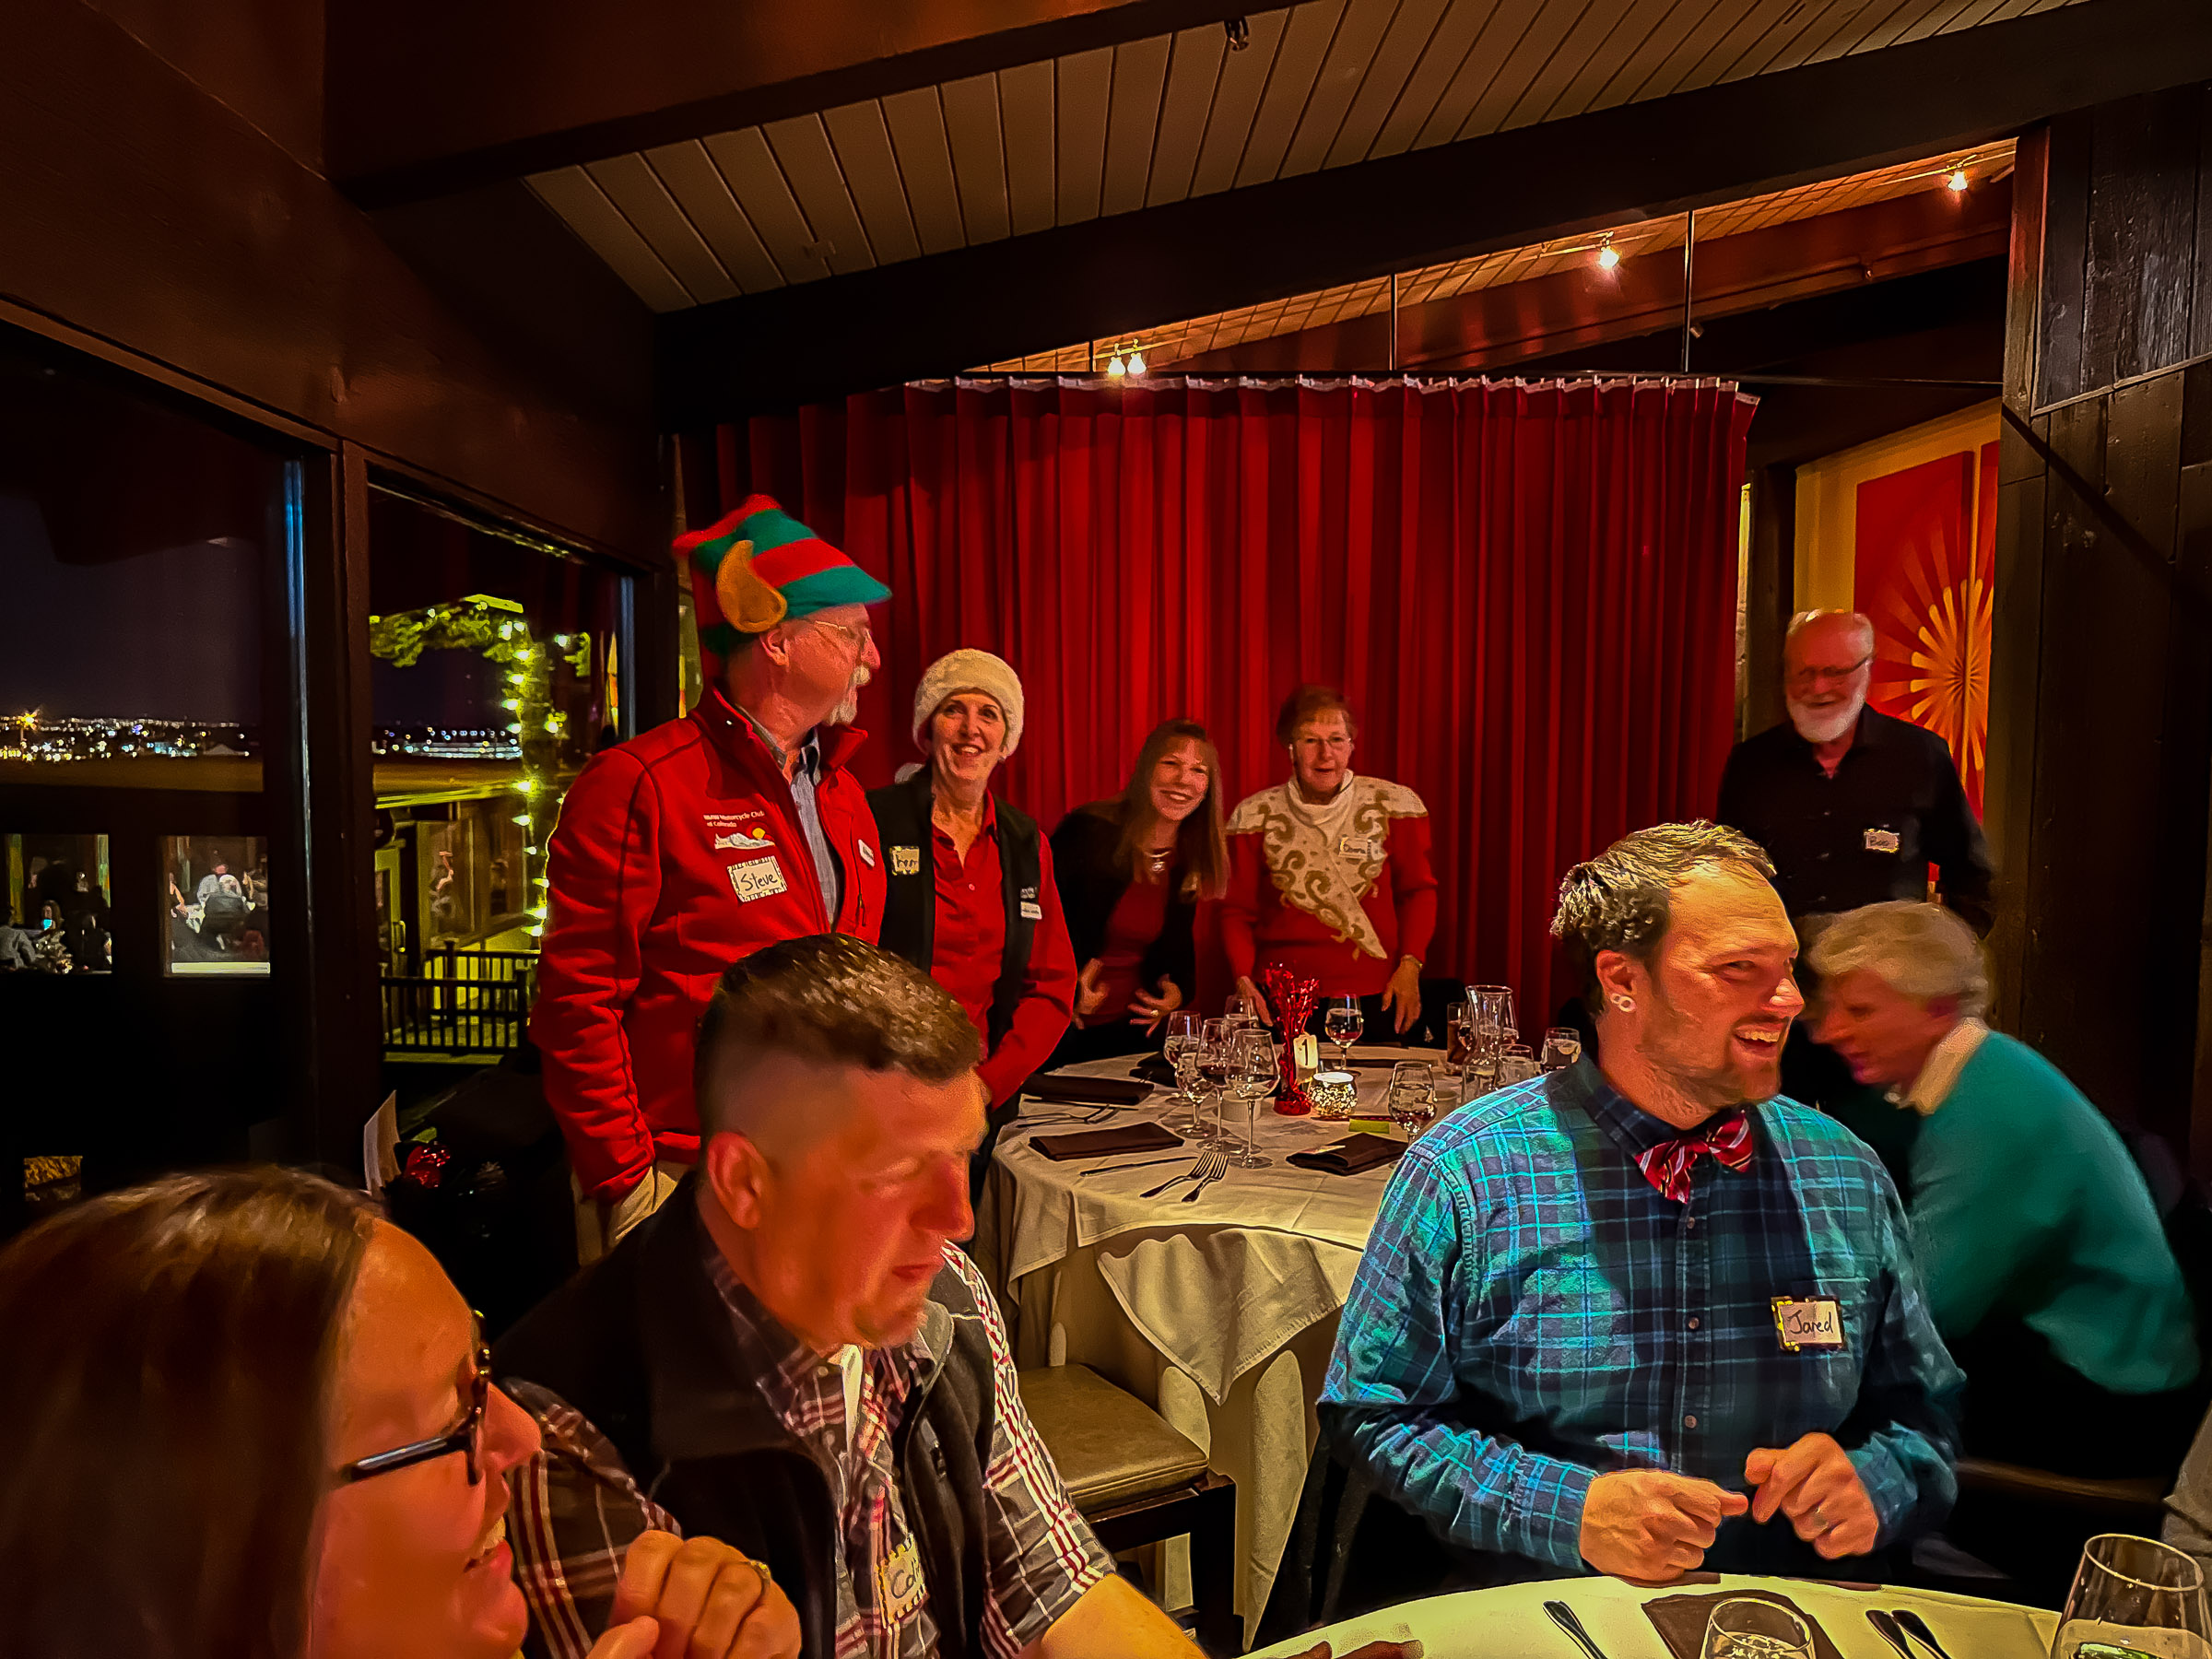 The club had is annual Holiday party at Simms Steak house last night. It's a great venue with an incredible view of the city. We had over 80 members attending for a great time.